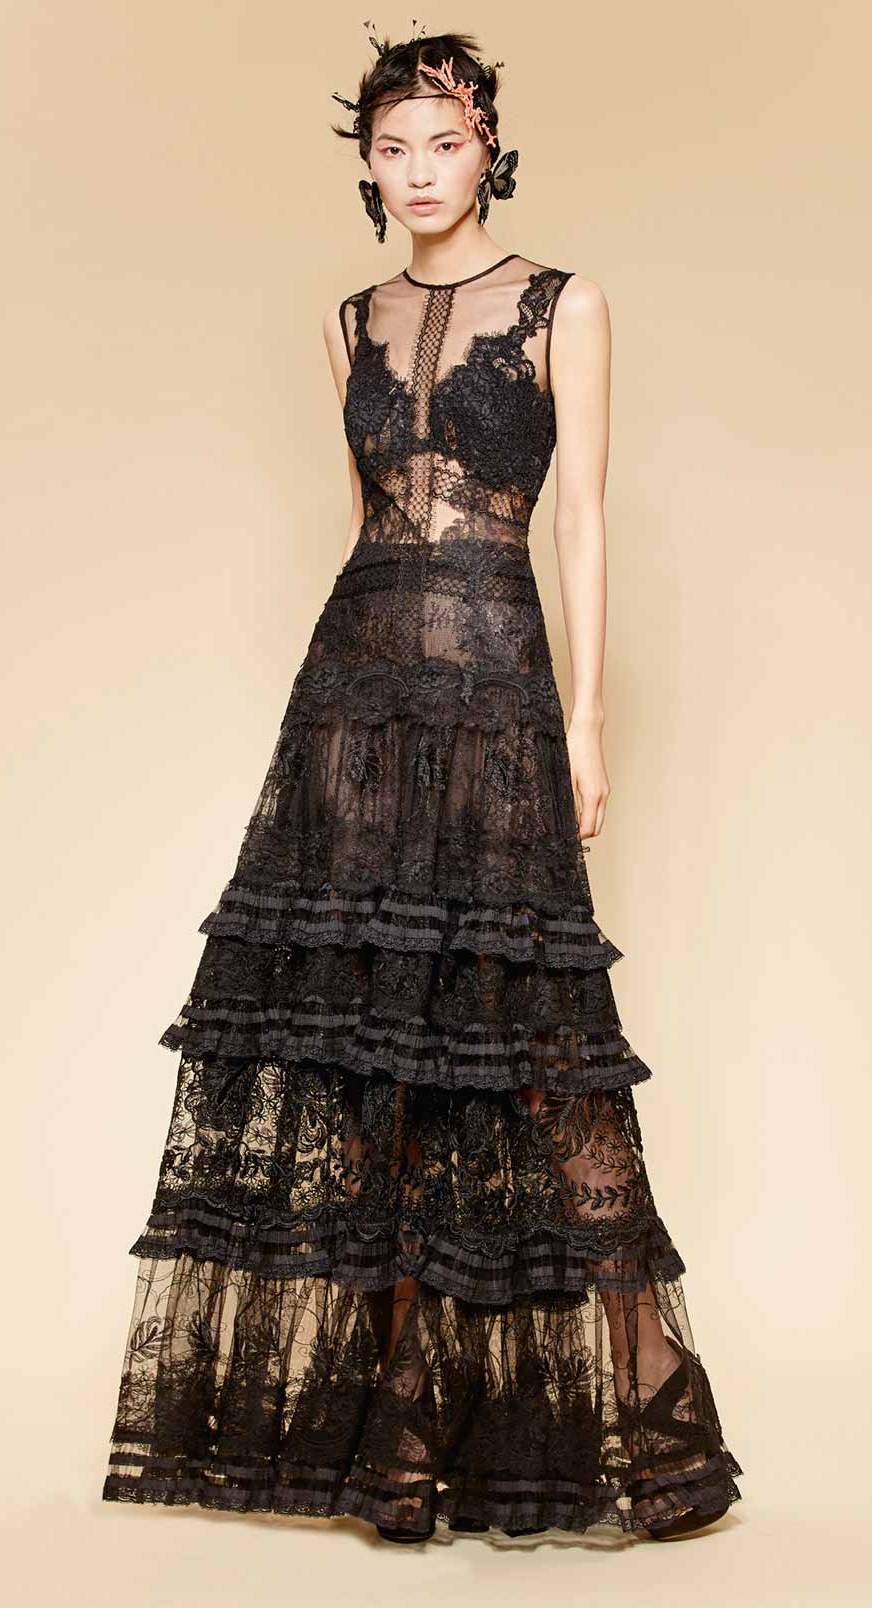 Long couture black gown made of fine French lace with boho folk lace layered